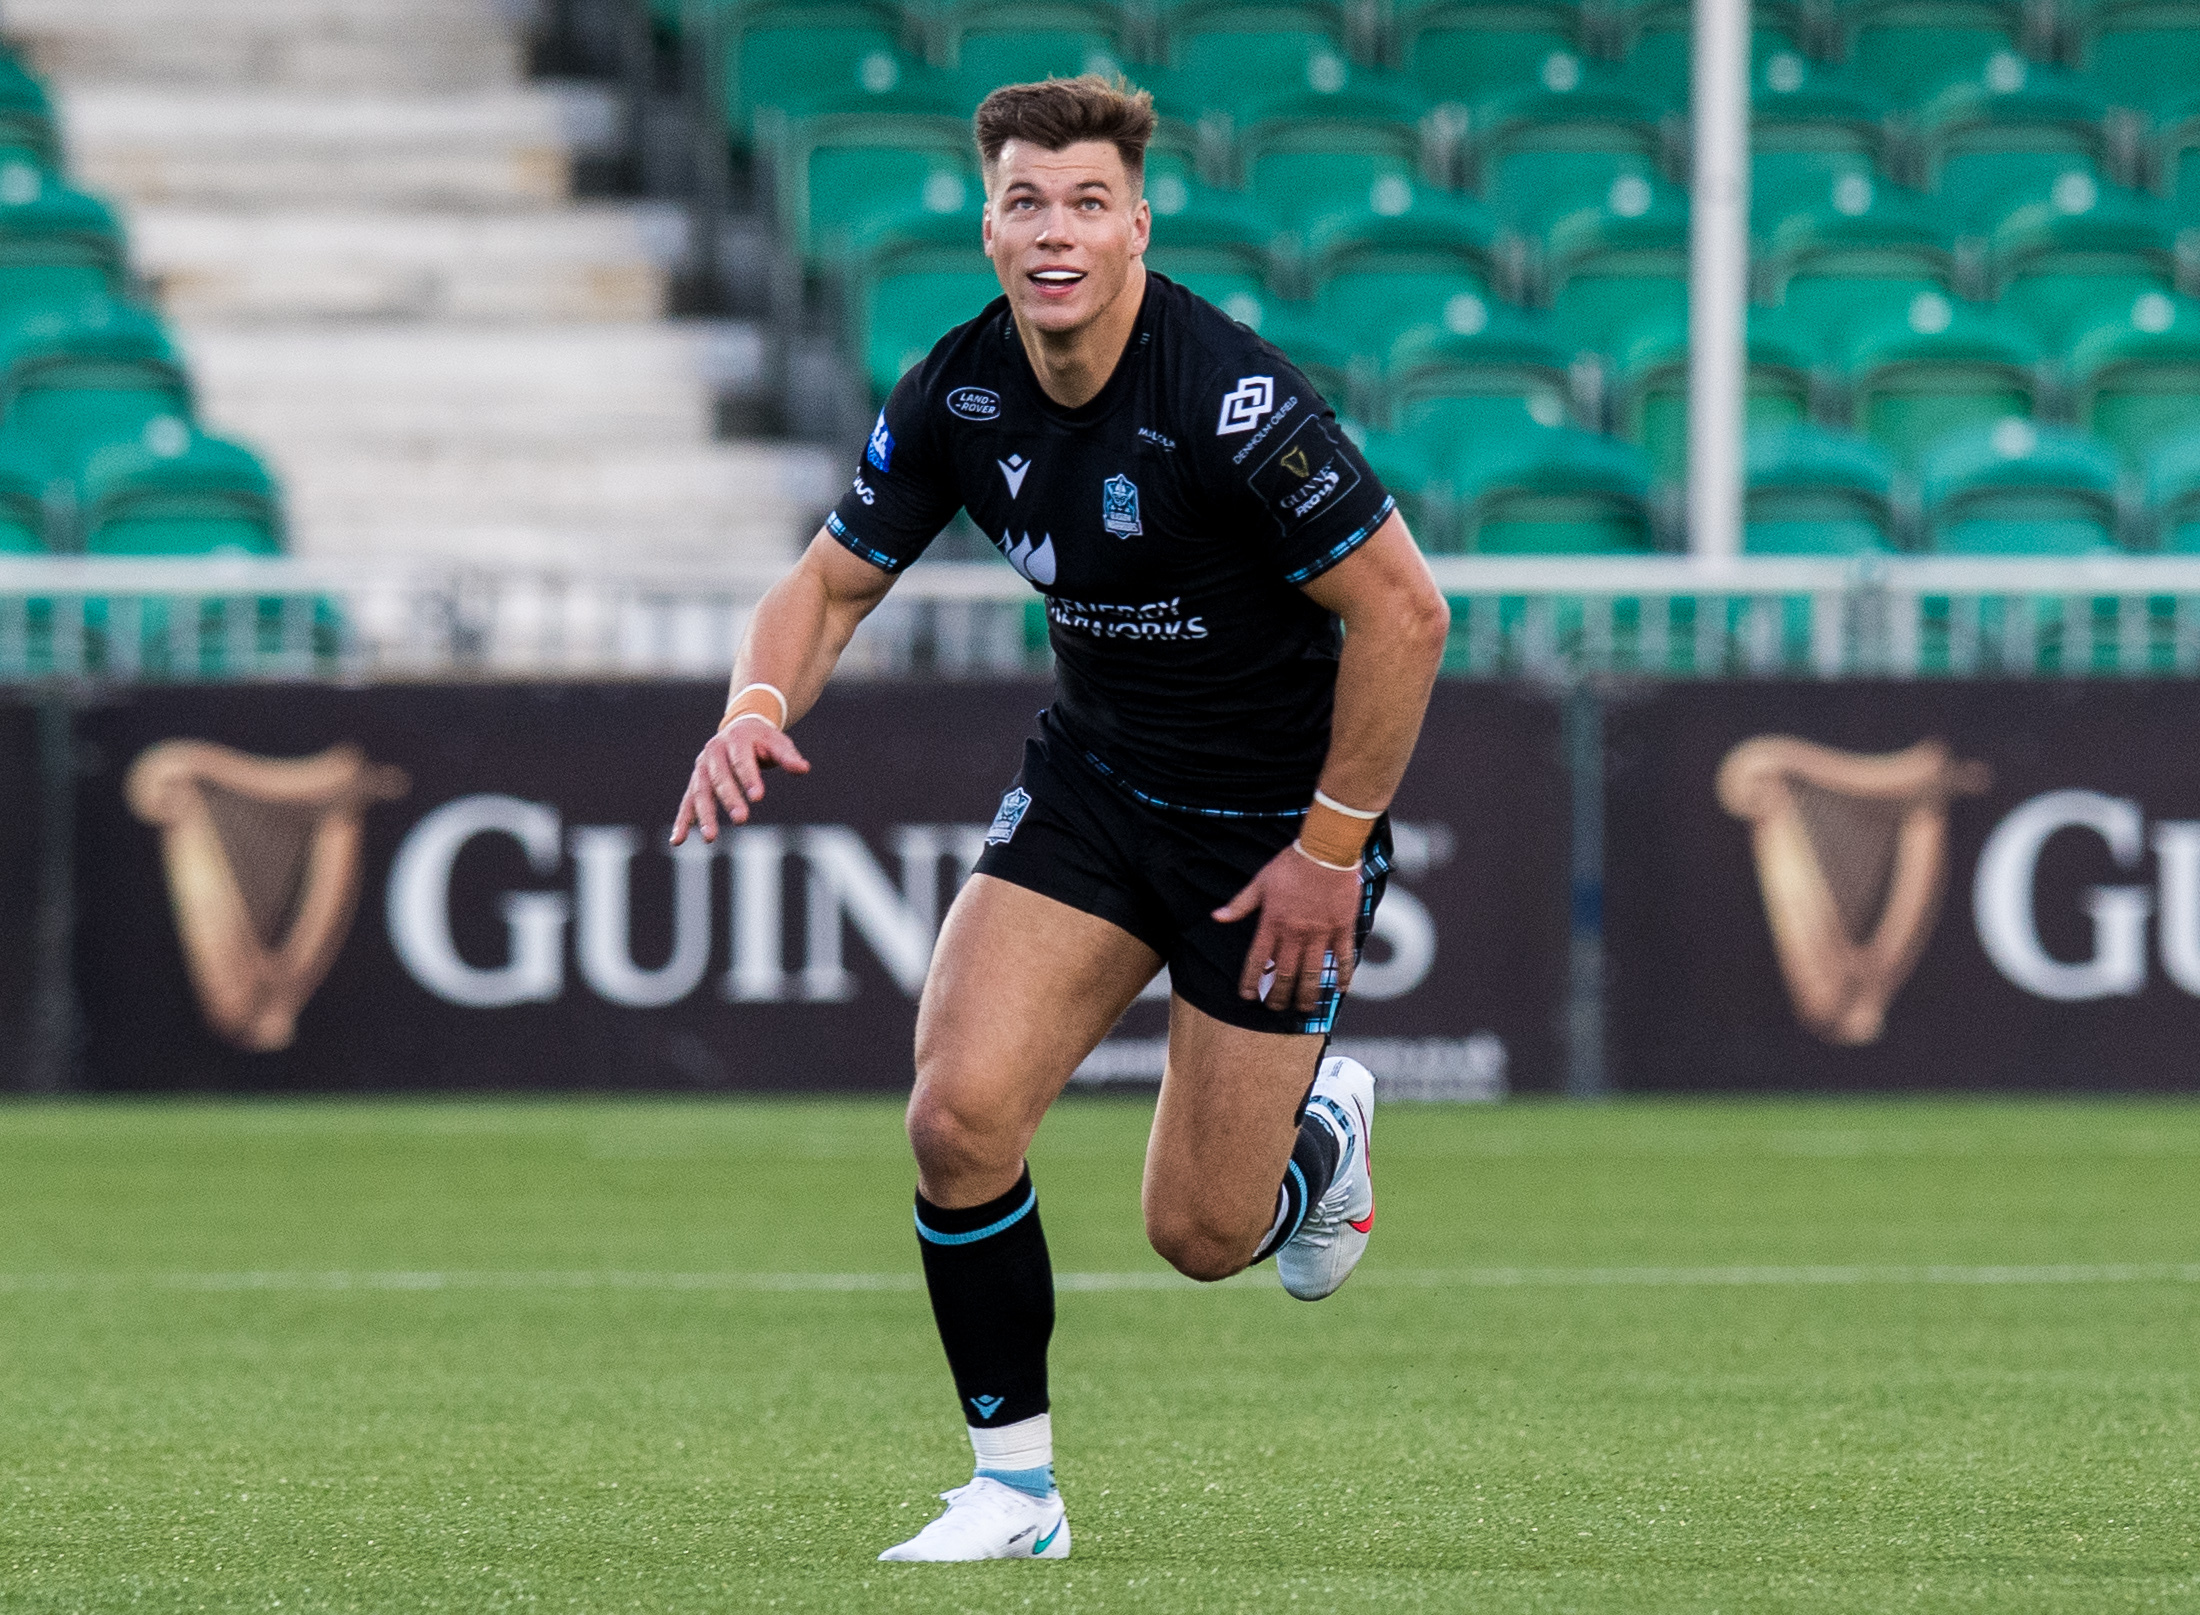 GLASGOW, SCOTLAND - OCTOBER 11: Huw Jones in action for Glasgow Warriors during the Guinness Pro14 match between Glasgow Warriors and Scarlets at Scotstoun Stadium, on October 11, 2020, in Glasgow, Scotland (Photo by Ross Parker / SNS Group).